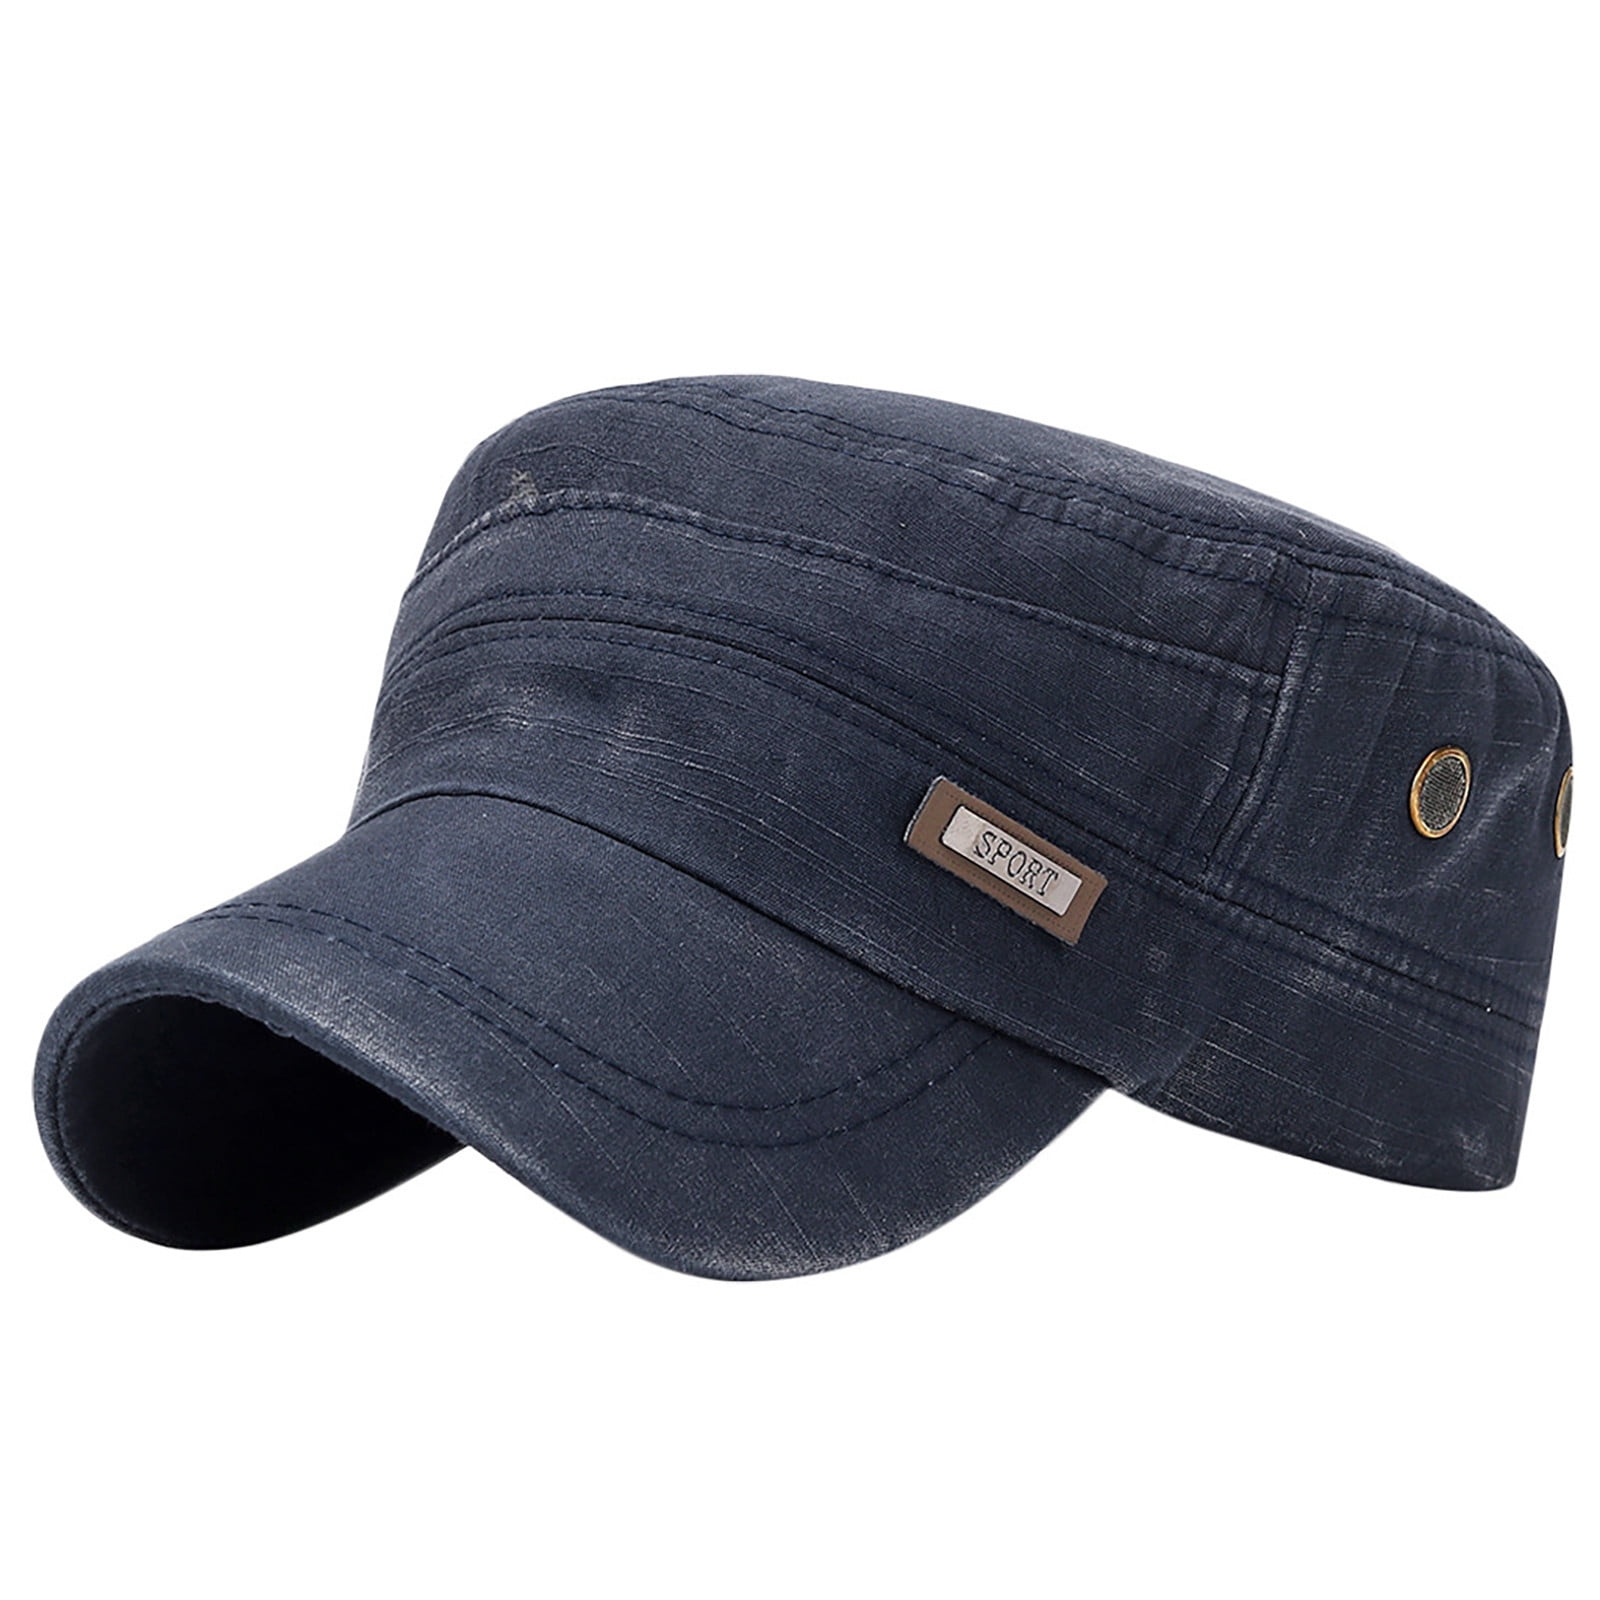 Details about   surgical/medical cap unisex Medical/First Aid 